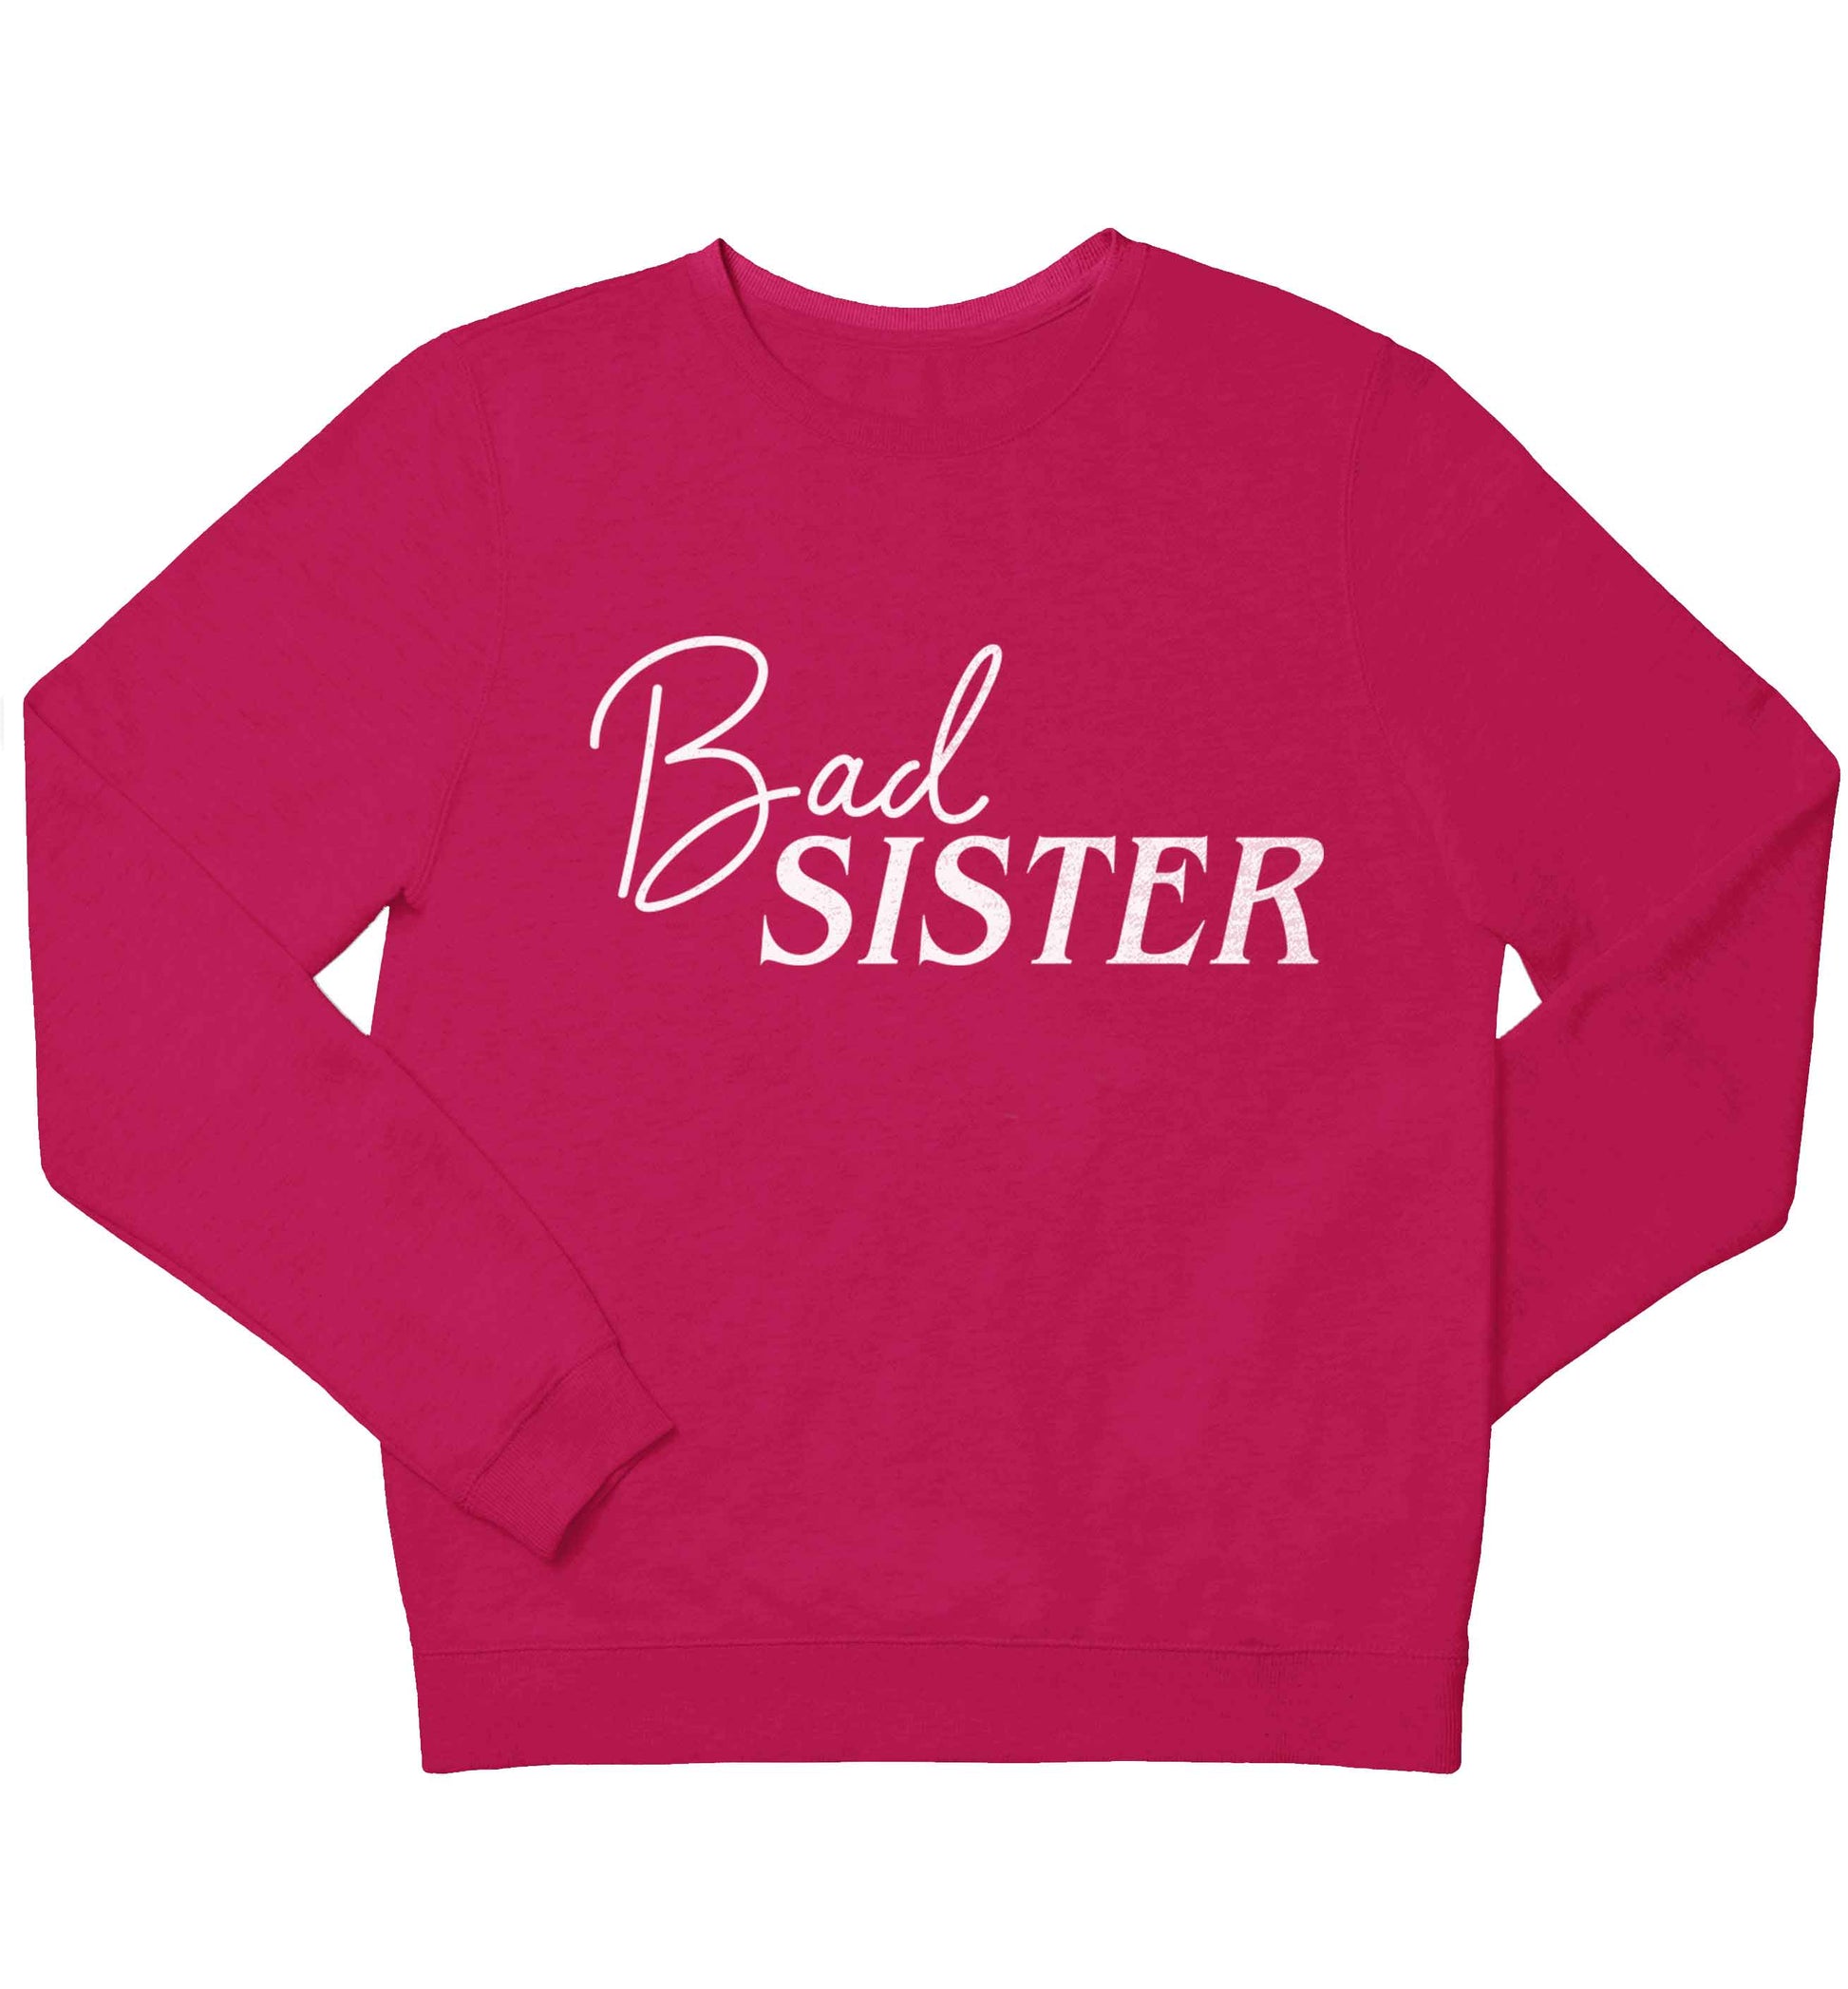 Bad sister children's pink sweater 12-13 Years